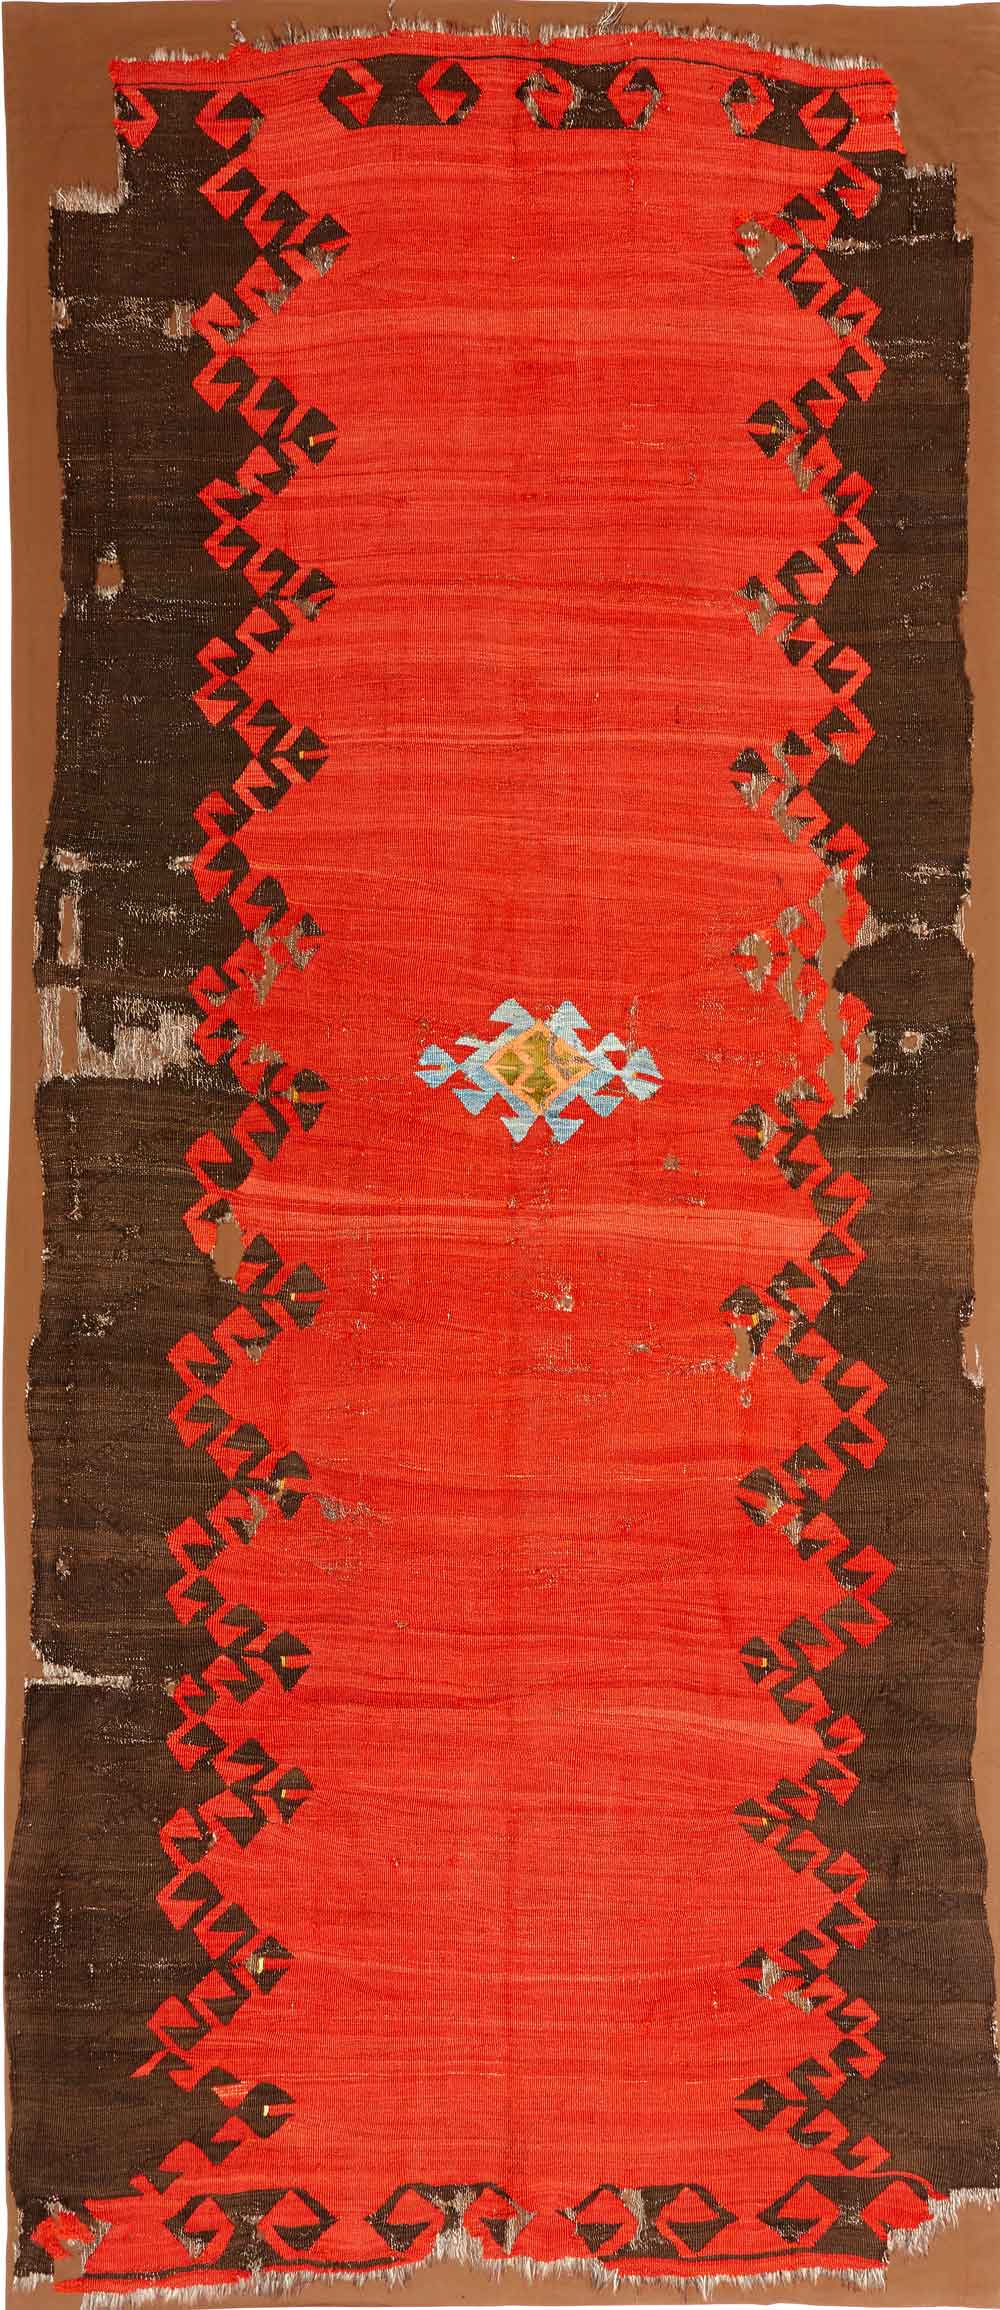 Central Anatolian kilim, 19th century, 147 x 347 cm. An extraordinary and extremely rare kilim on view at 100 Kilims, Neiriz Collection, at Halle, Germany 